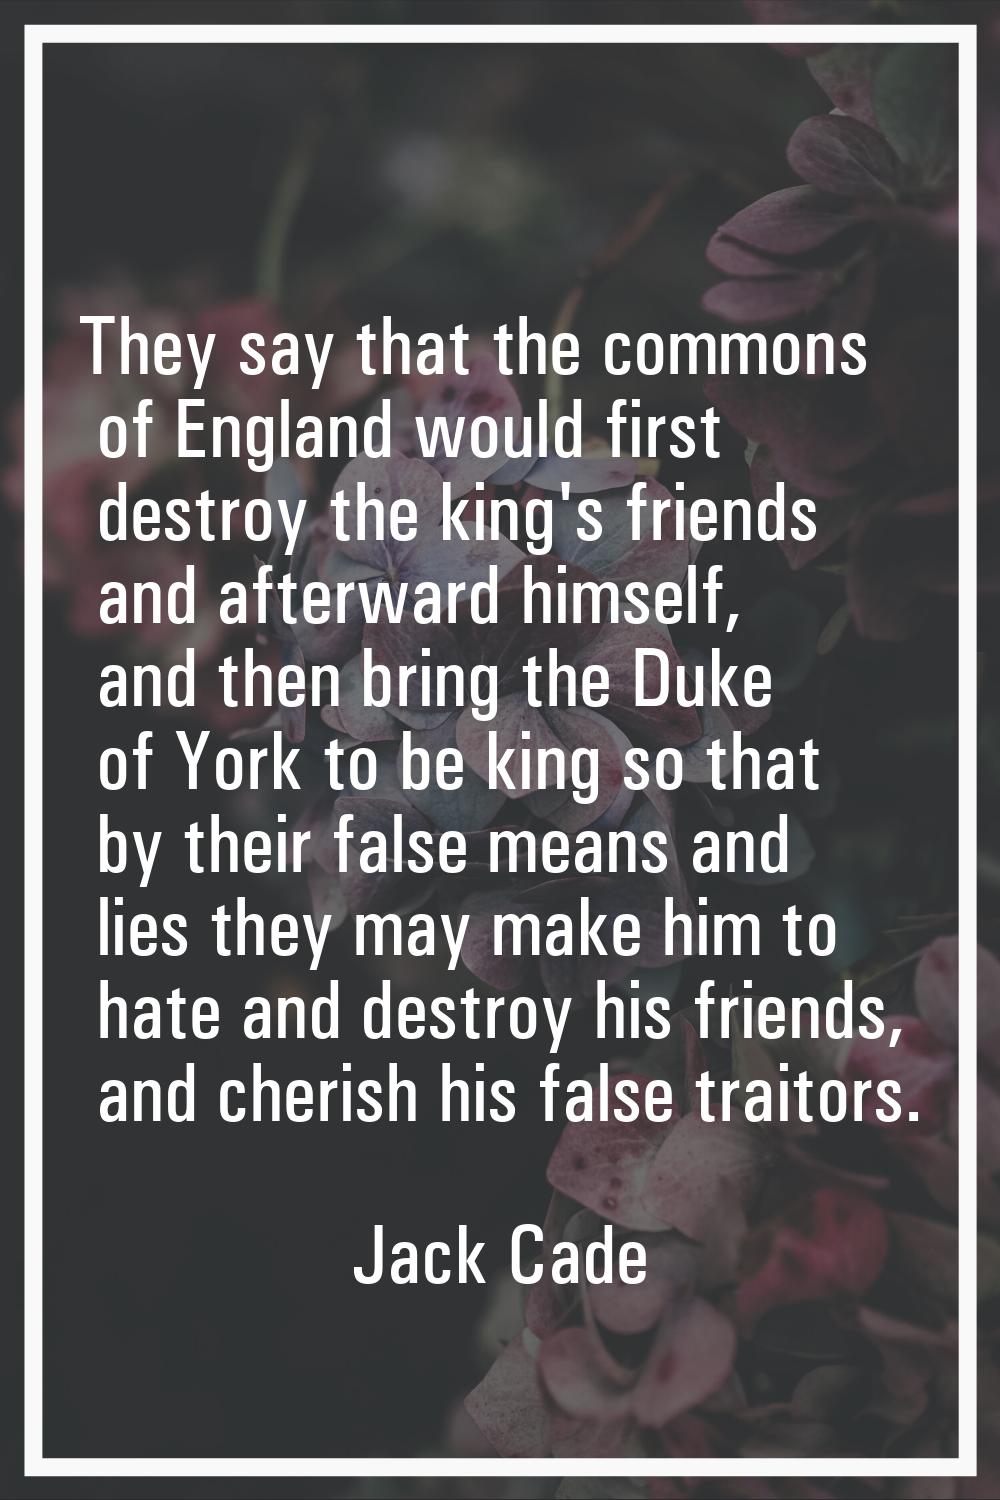 They say that the commons of England would first destroy the king's friends and afterward himself, 